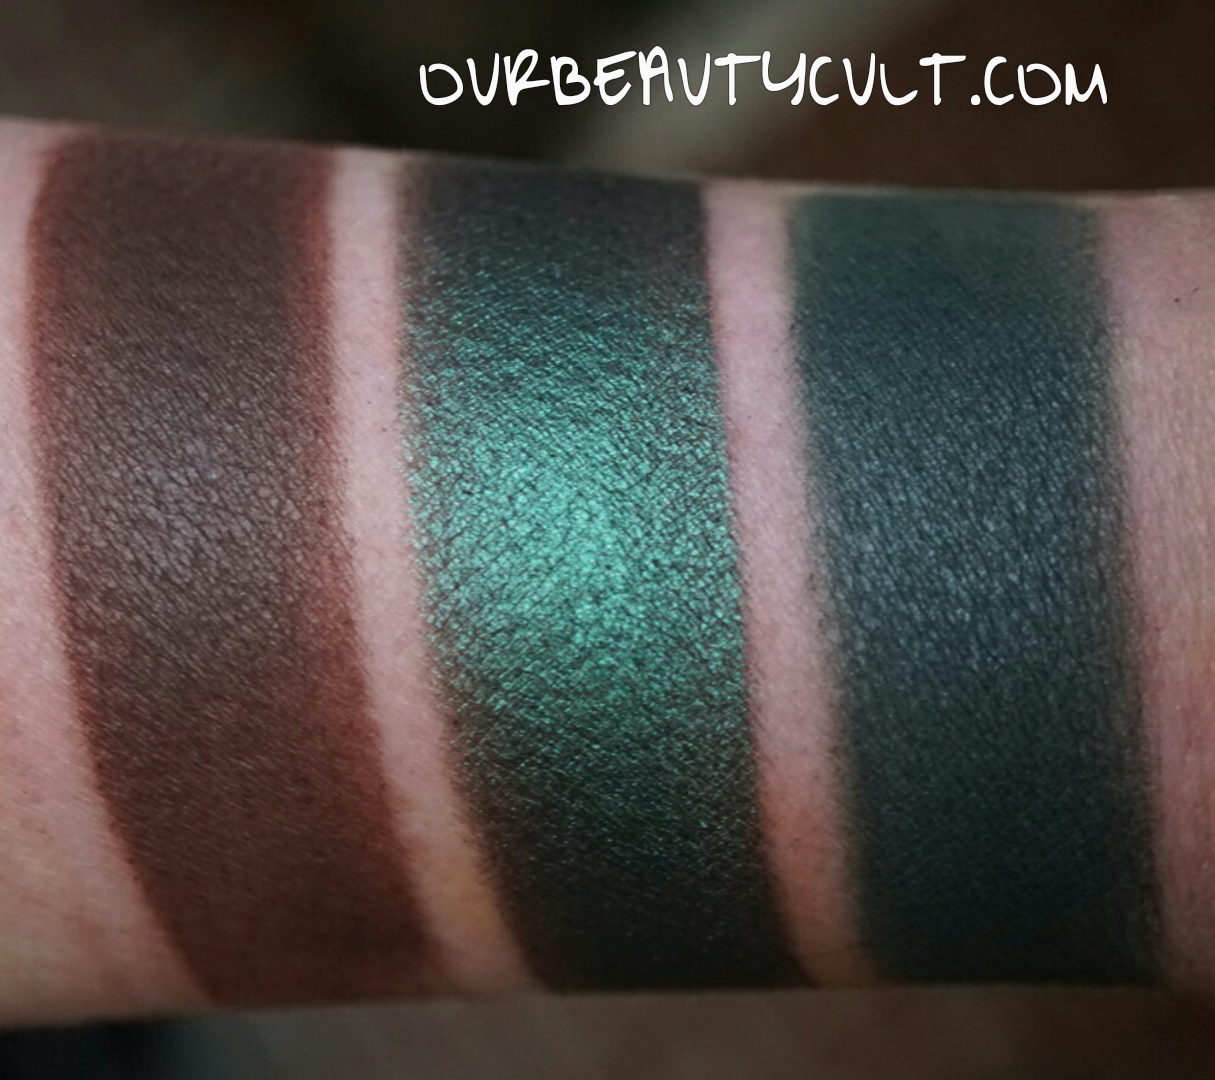 Epic Eye Makeup Makeup Geek Holiday Eyeshadow Bundle Swatches Our Beauty Cult